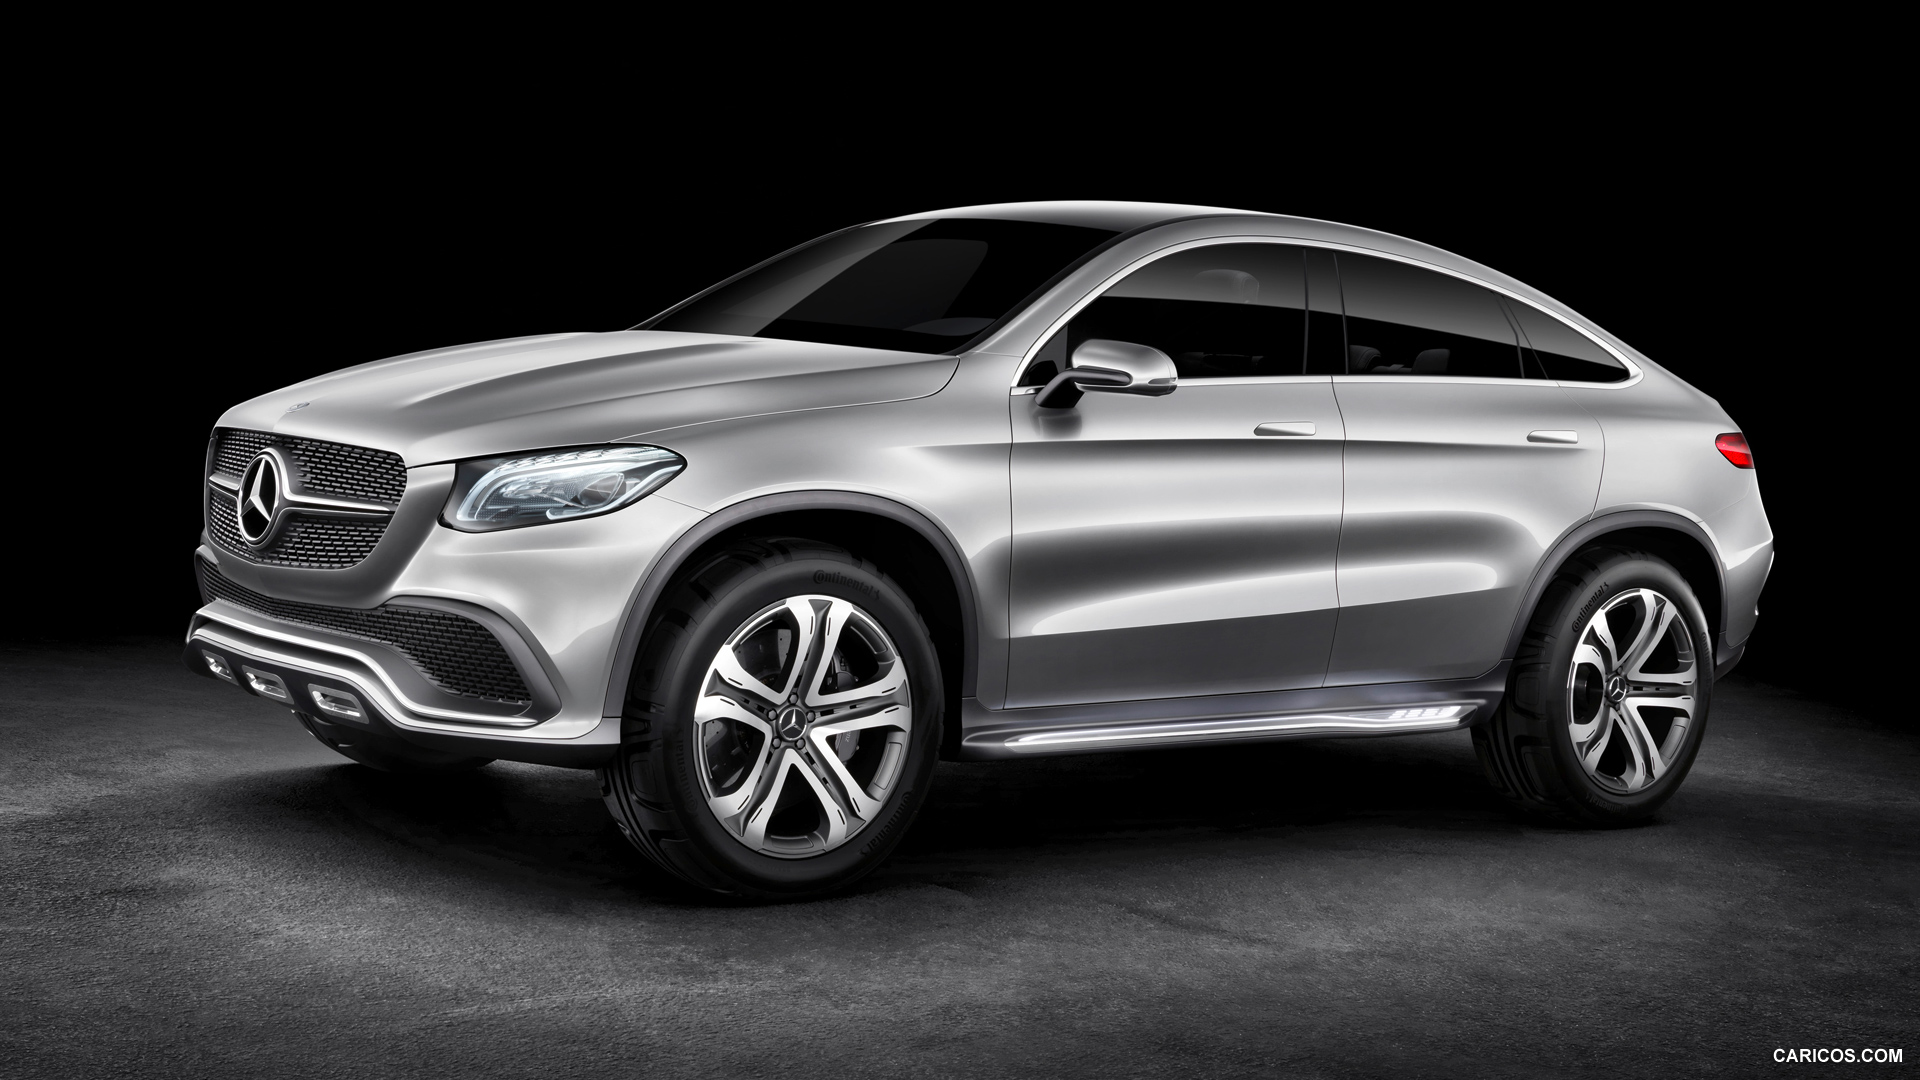 2014 Mercedes-Benz Coupe SUV Concept  - Side, #11 of 17